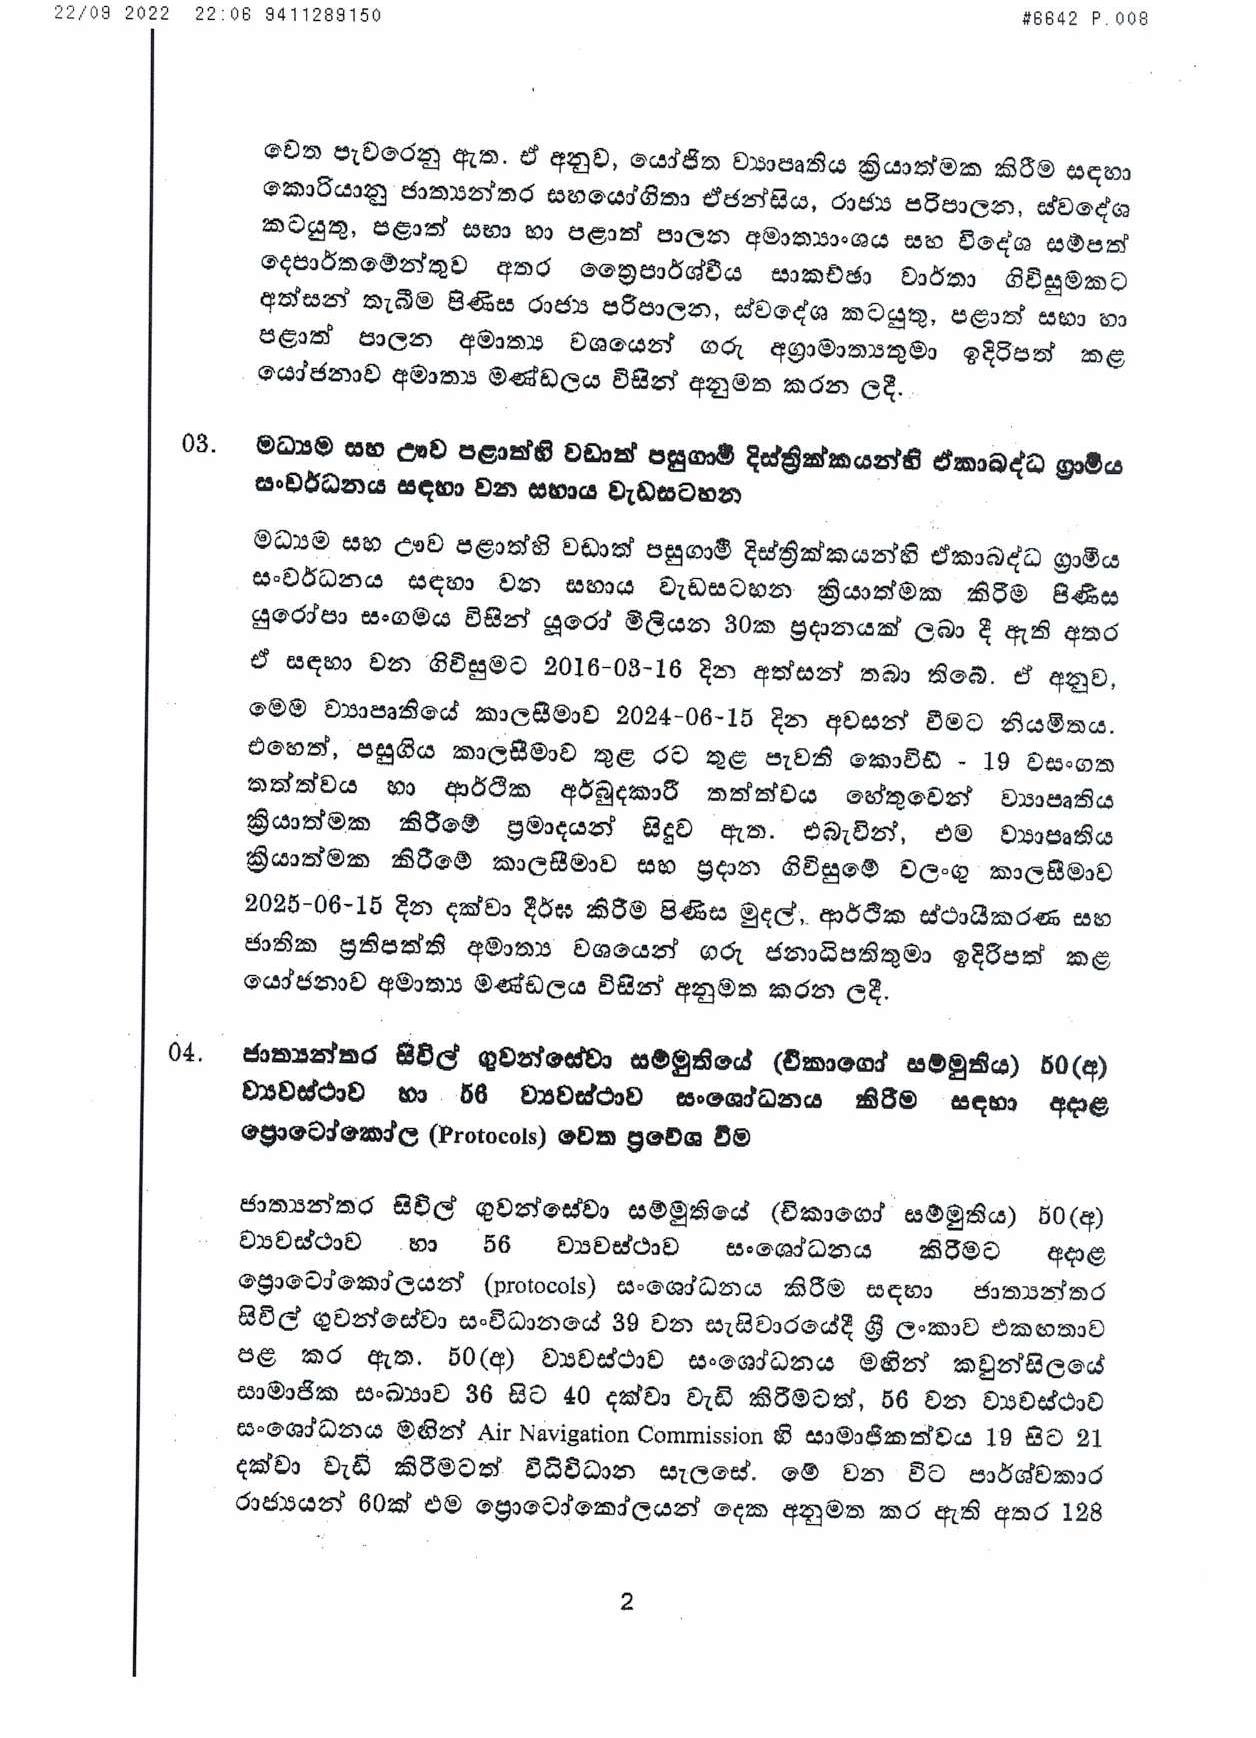 Cabinet Decisions on 23.09.2022 S page 002